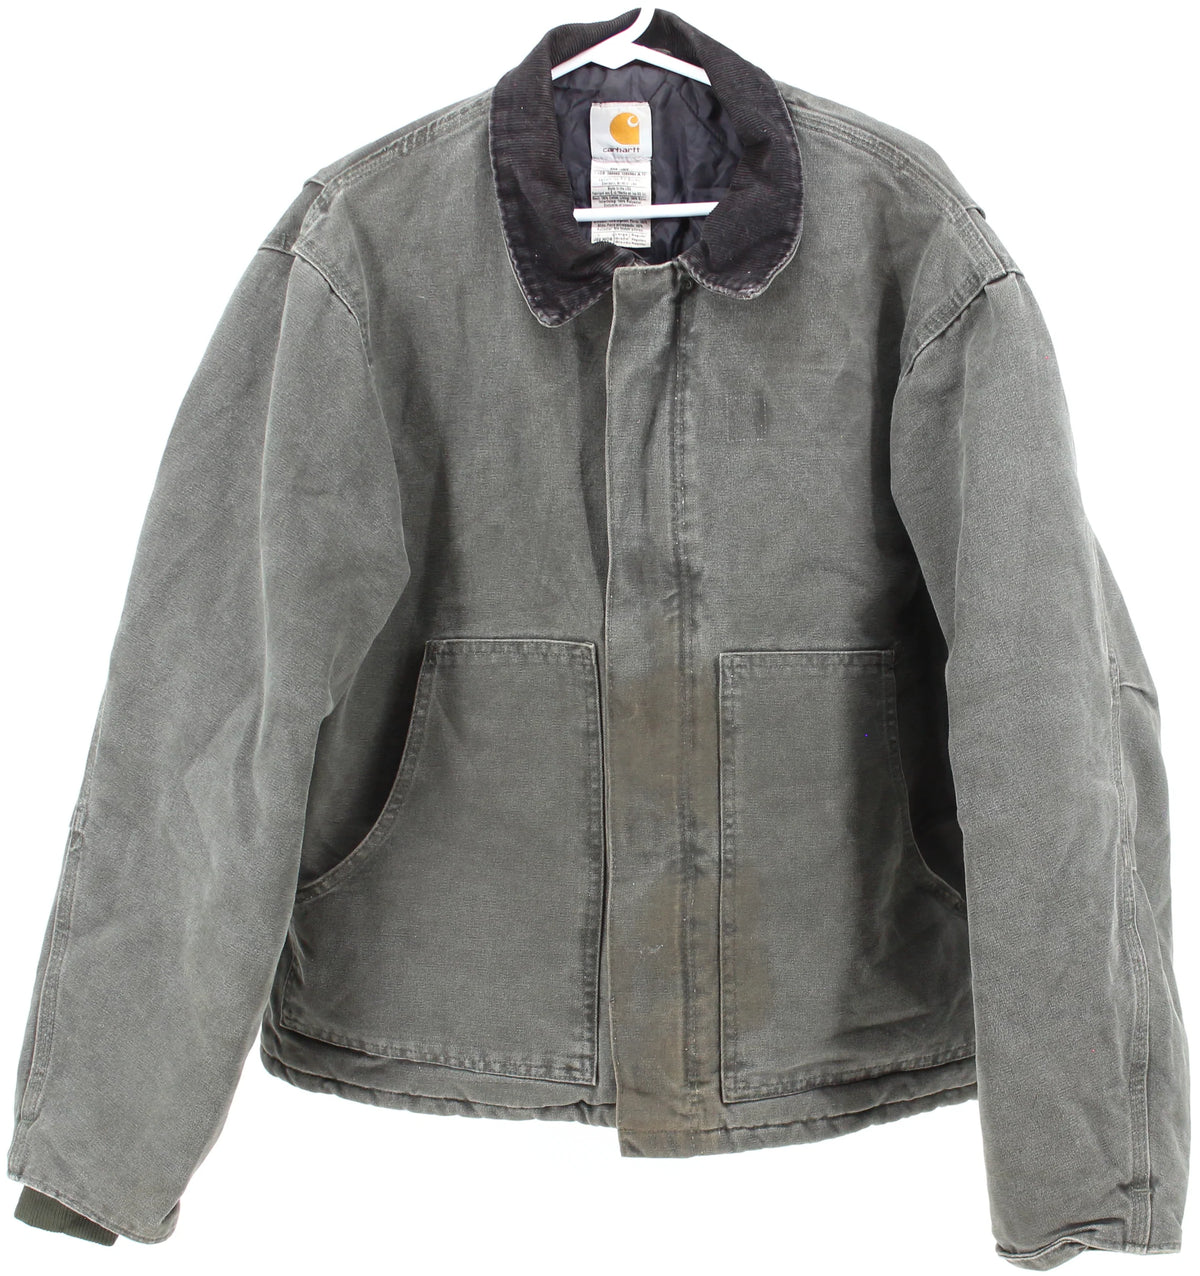 Carhartt Green Quilt Lined Jacket and Black Corduroy Collar